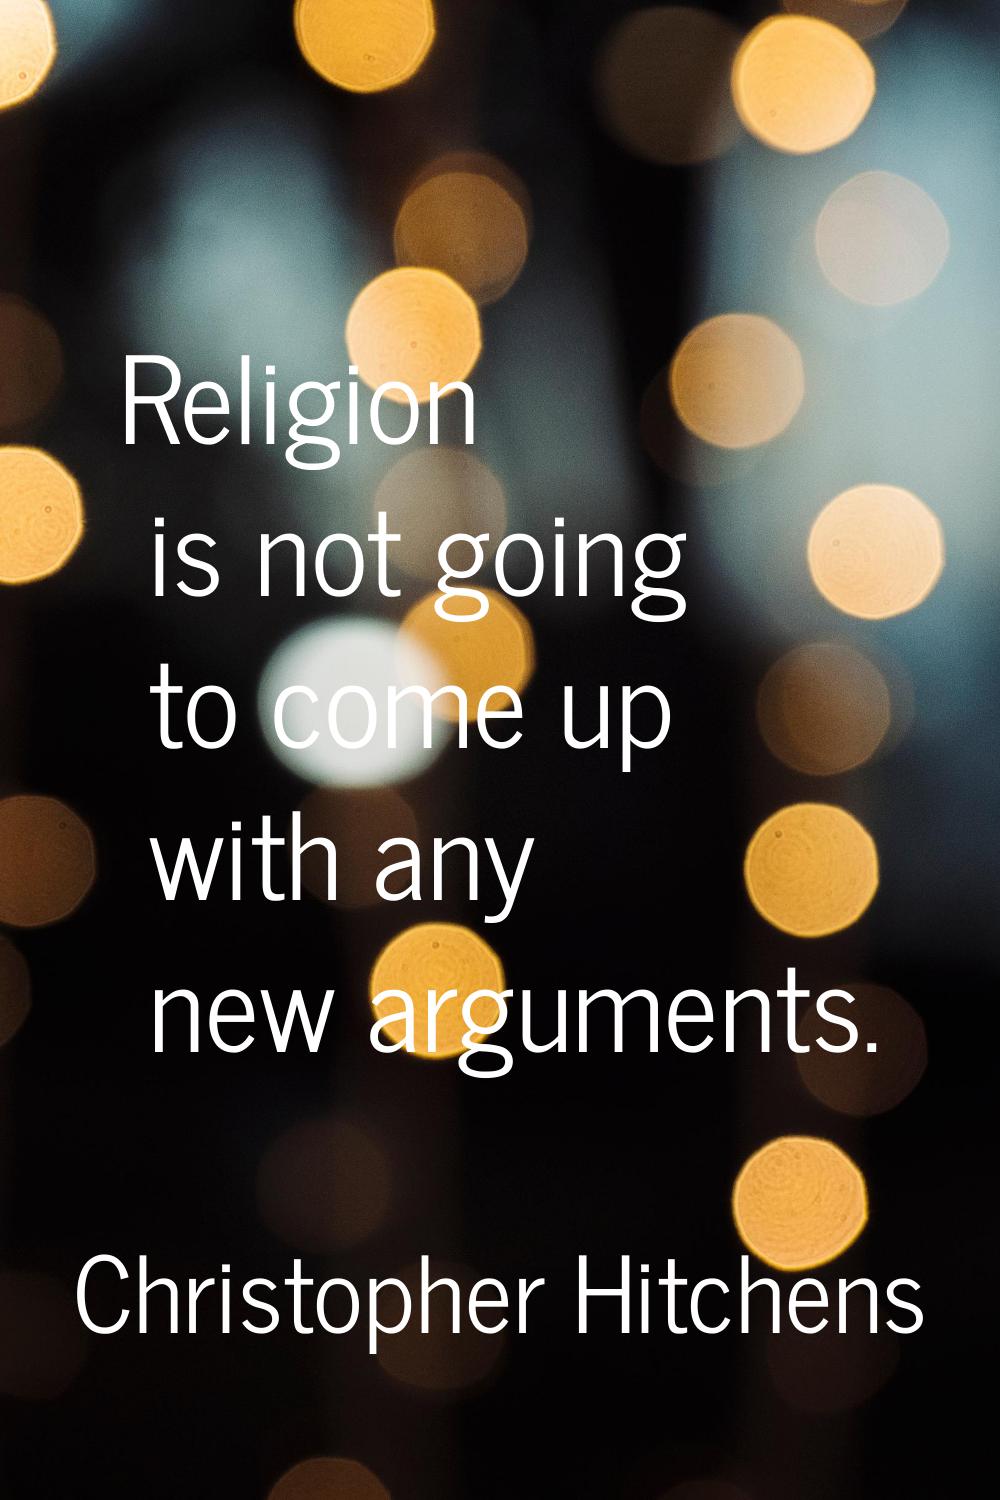 Religion is not going to come up with any new arguments.